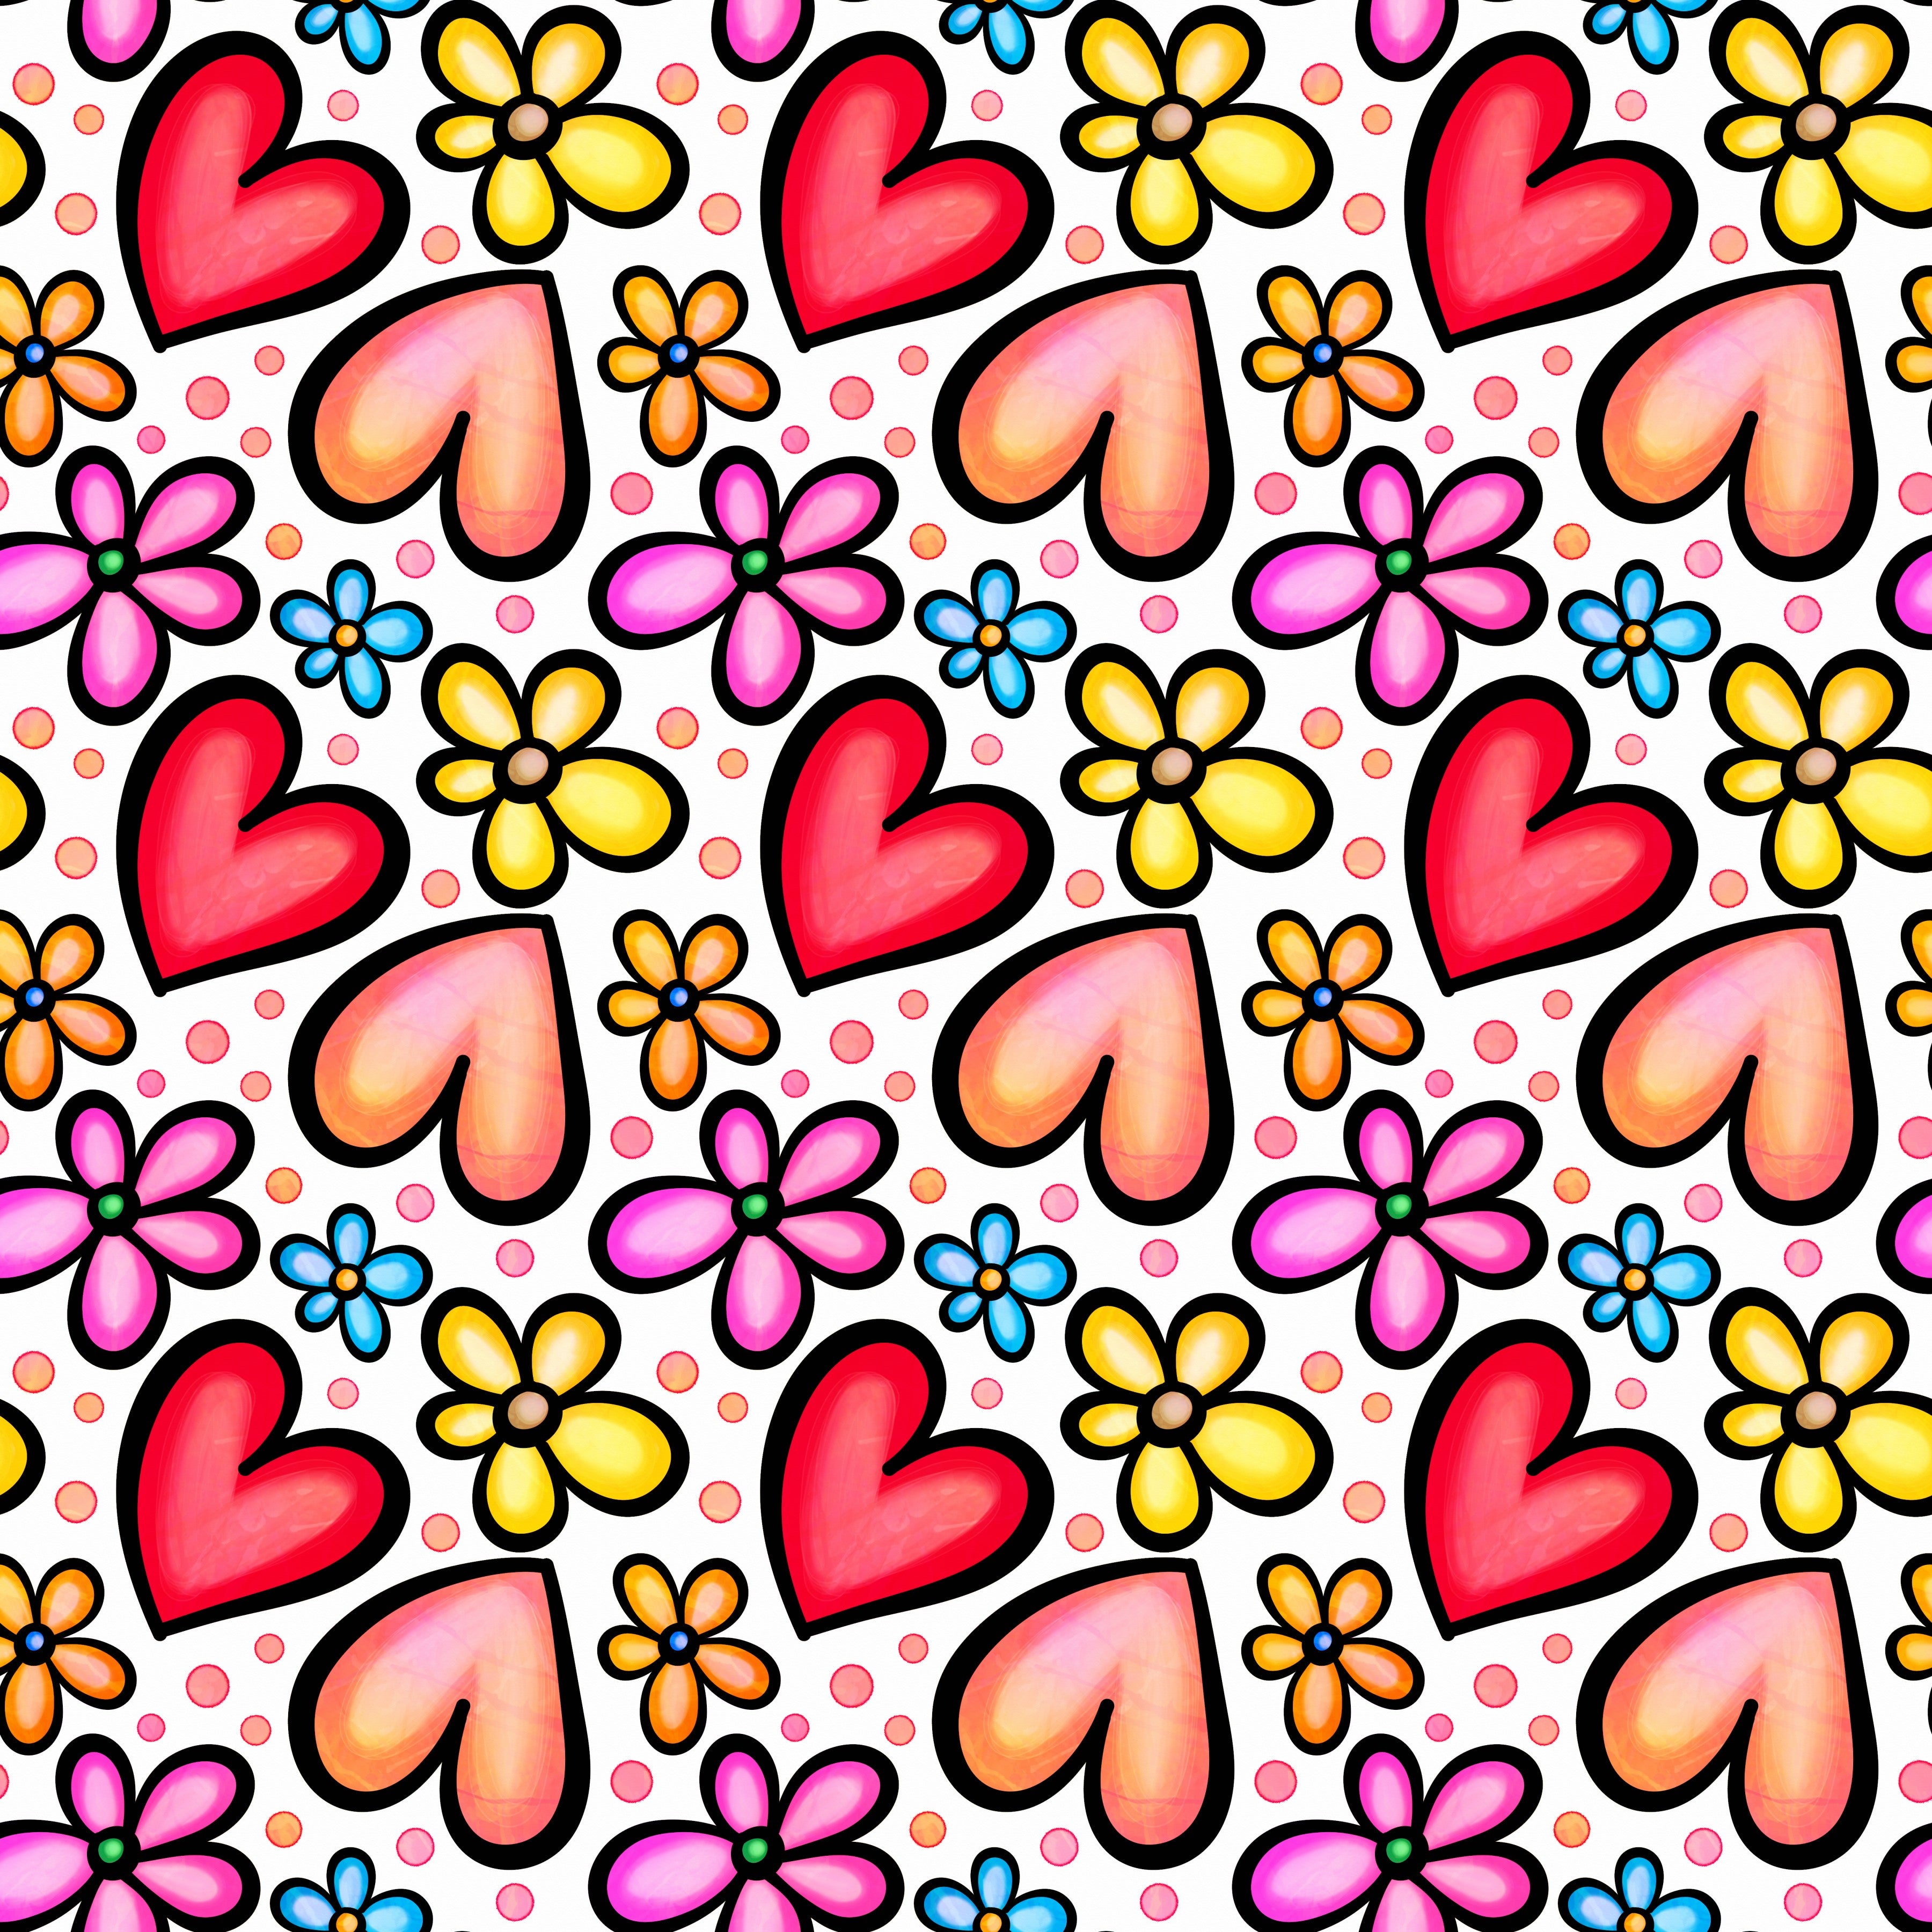 Doodle Hearts and Flowers Pattern Vinyl 12" x 12" - The Vinyl Haus